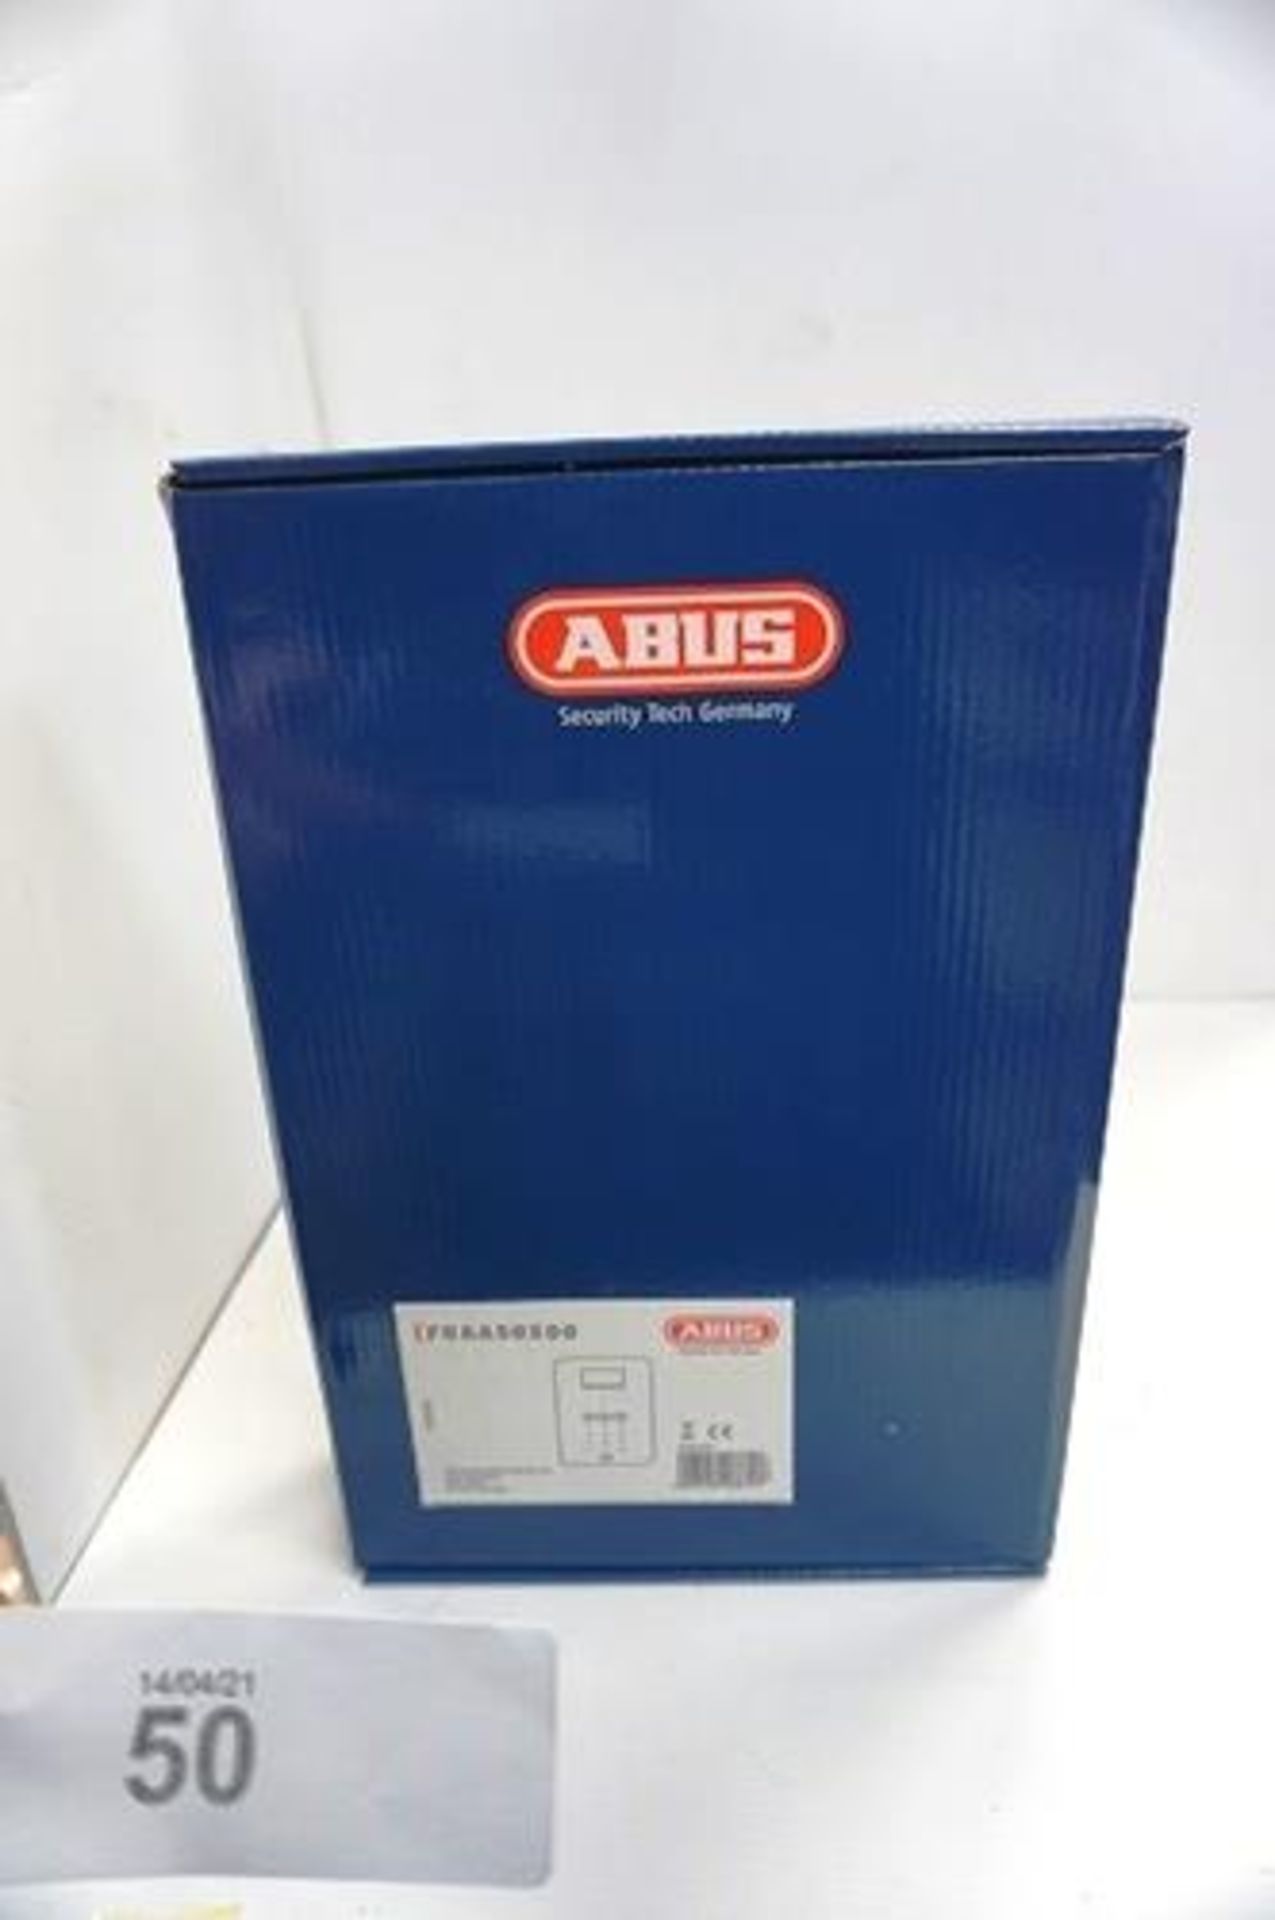 Abus Secvest touch wireless alarm system, model FUAA50500, control panel only - Sealed new in box (